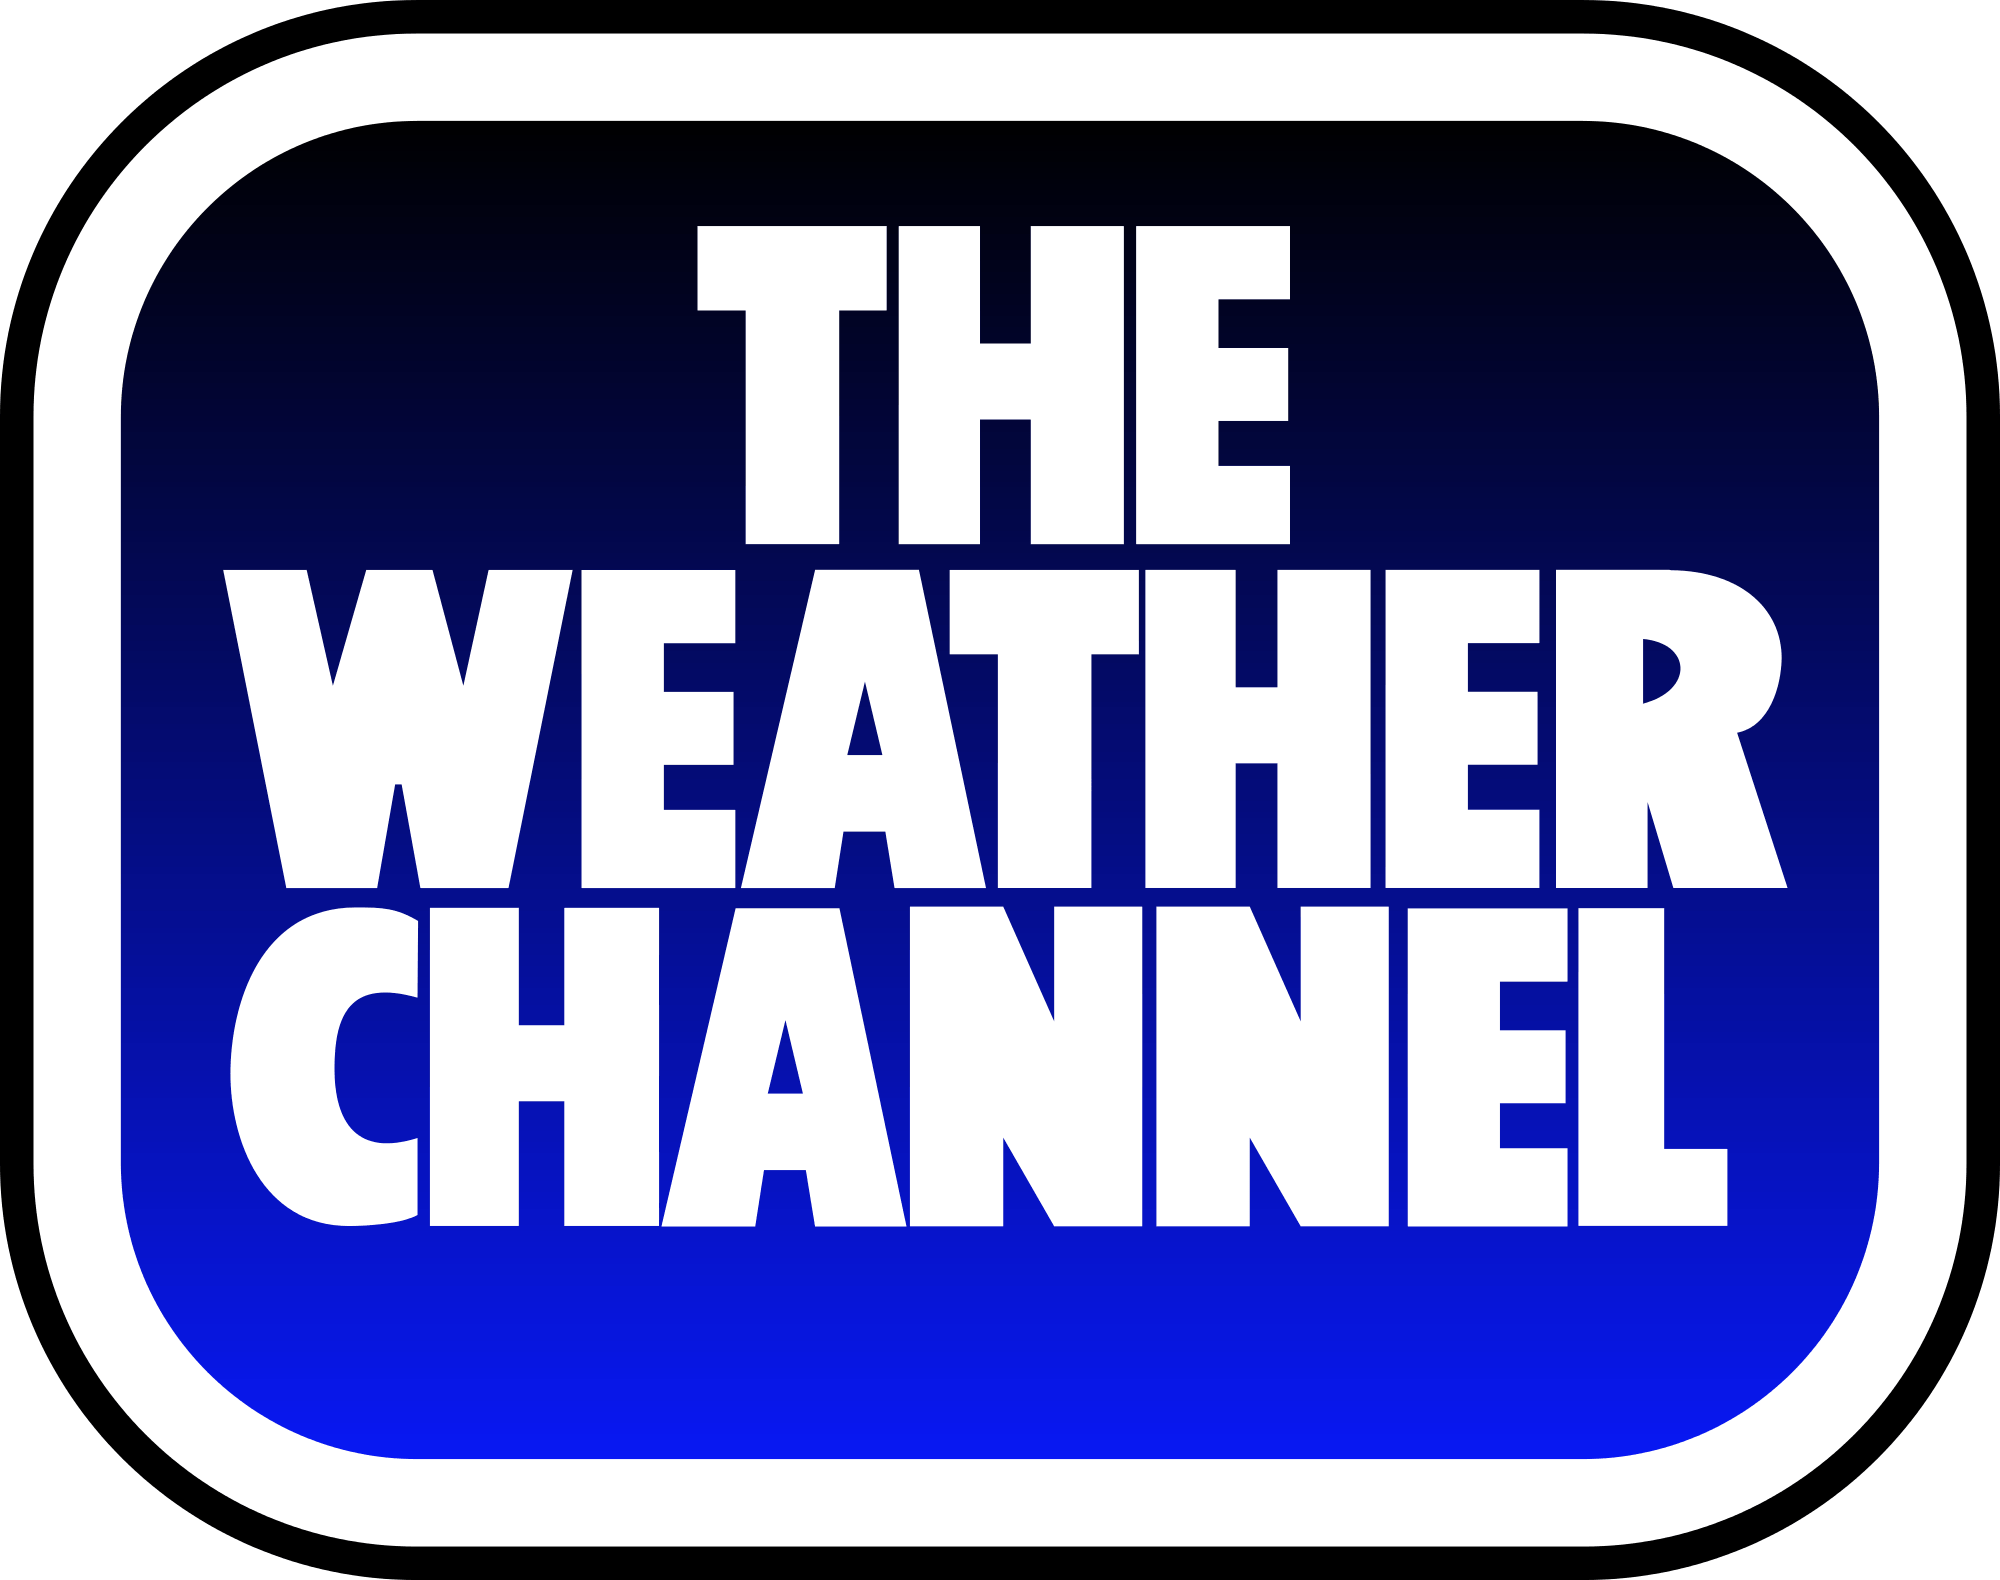 The Weather Channel Logo - File:The Weather Channel logo 1982-1996.svg - Wikimedia Commons